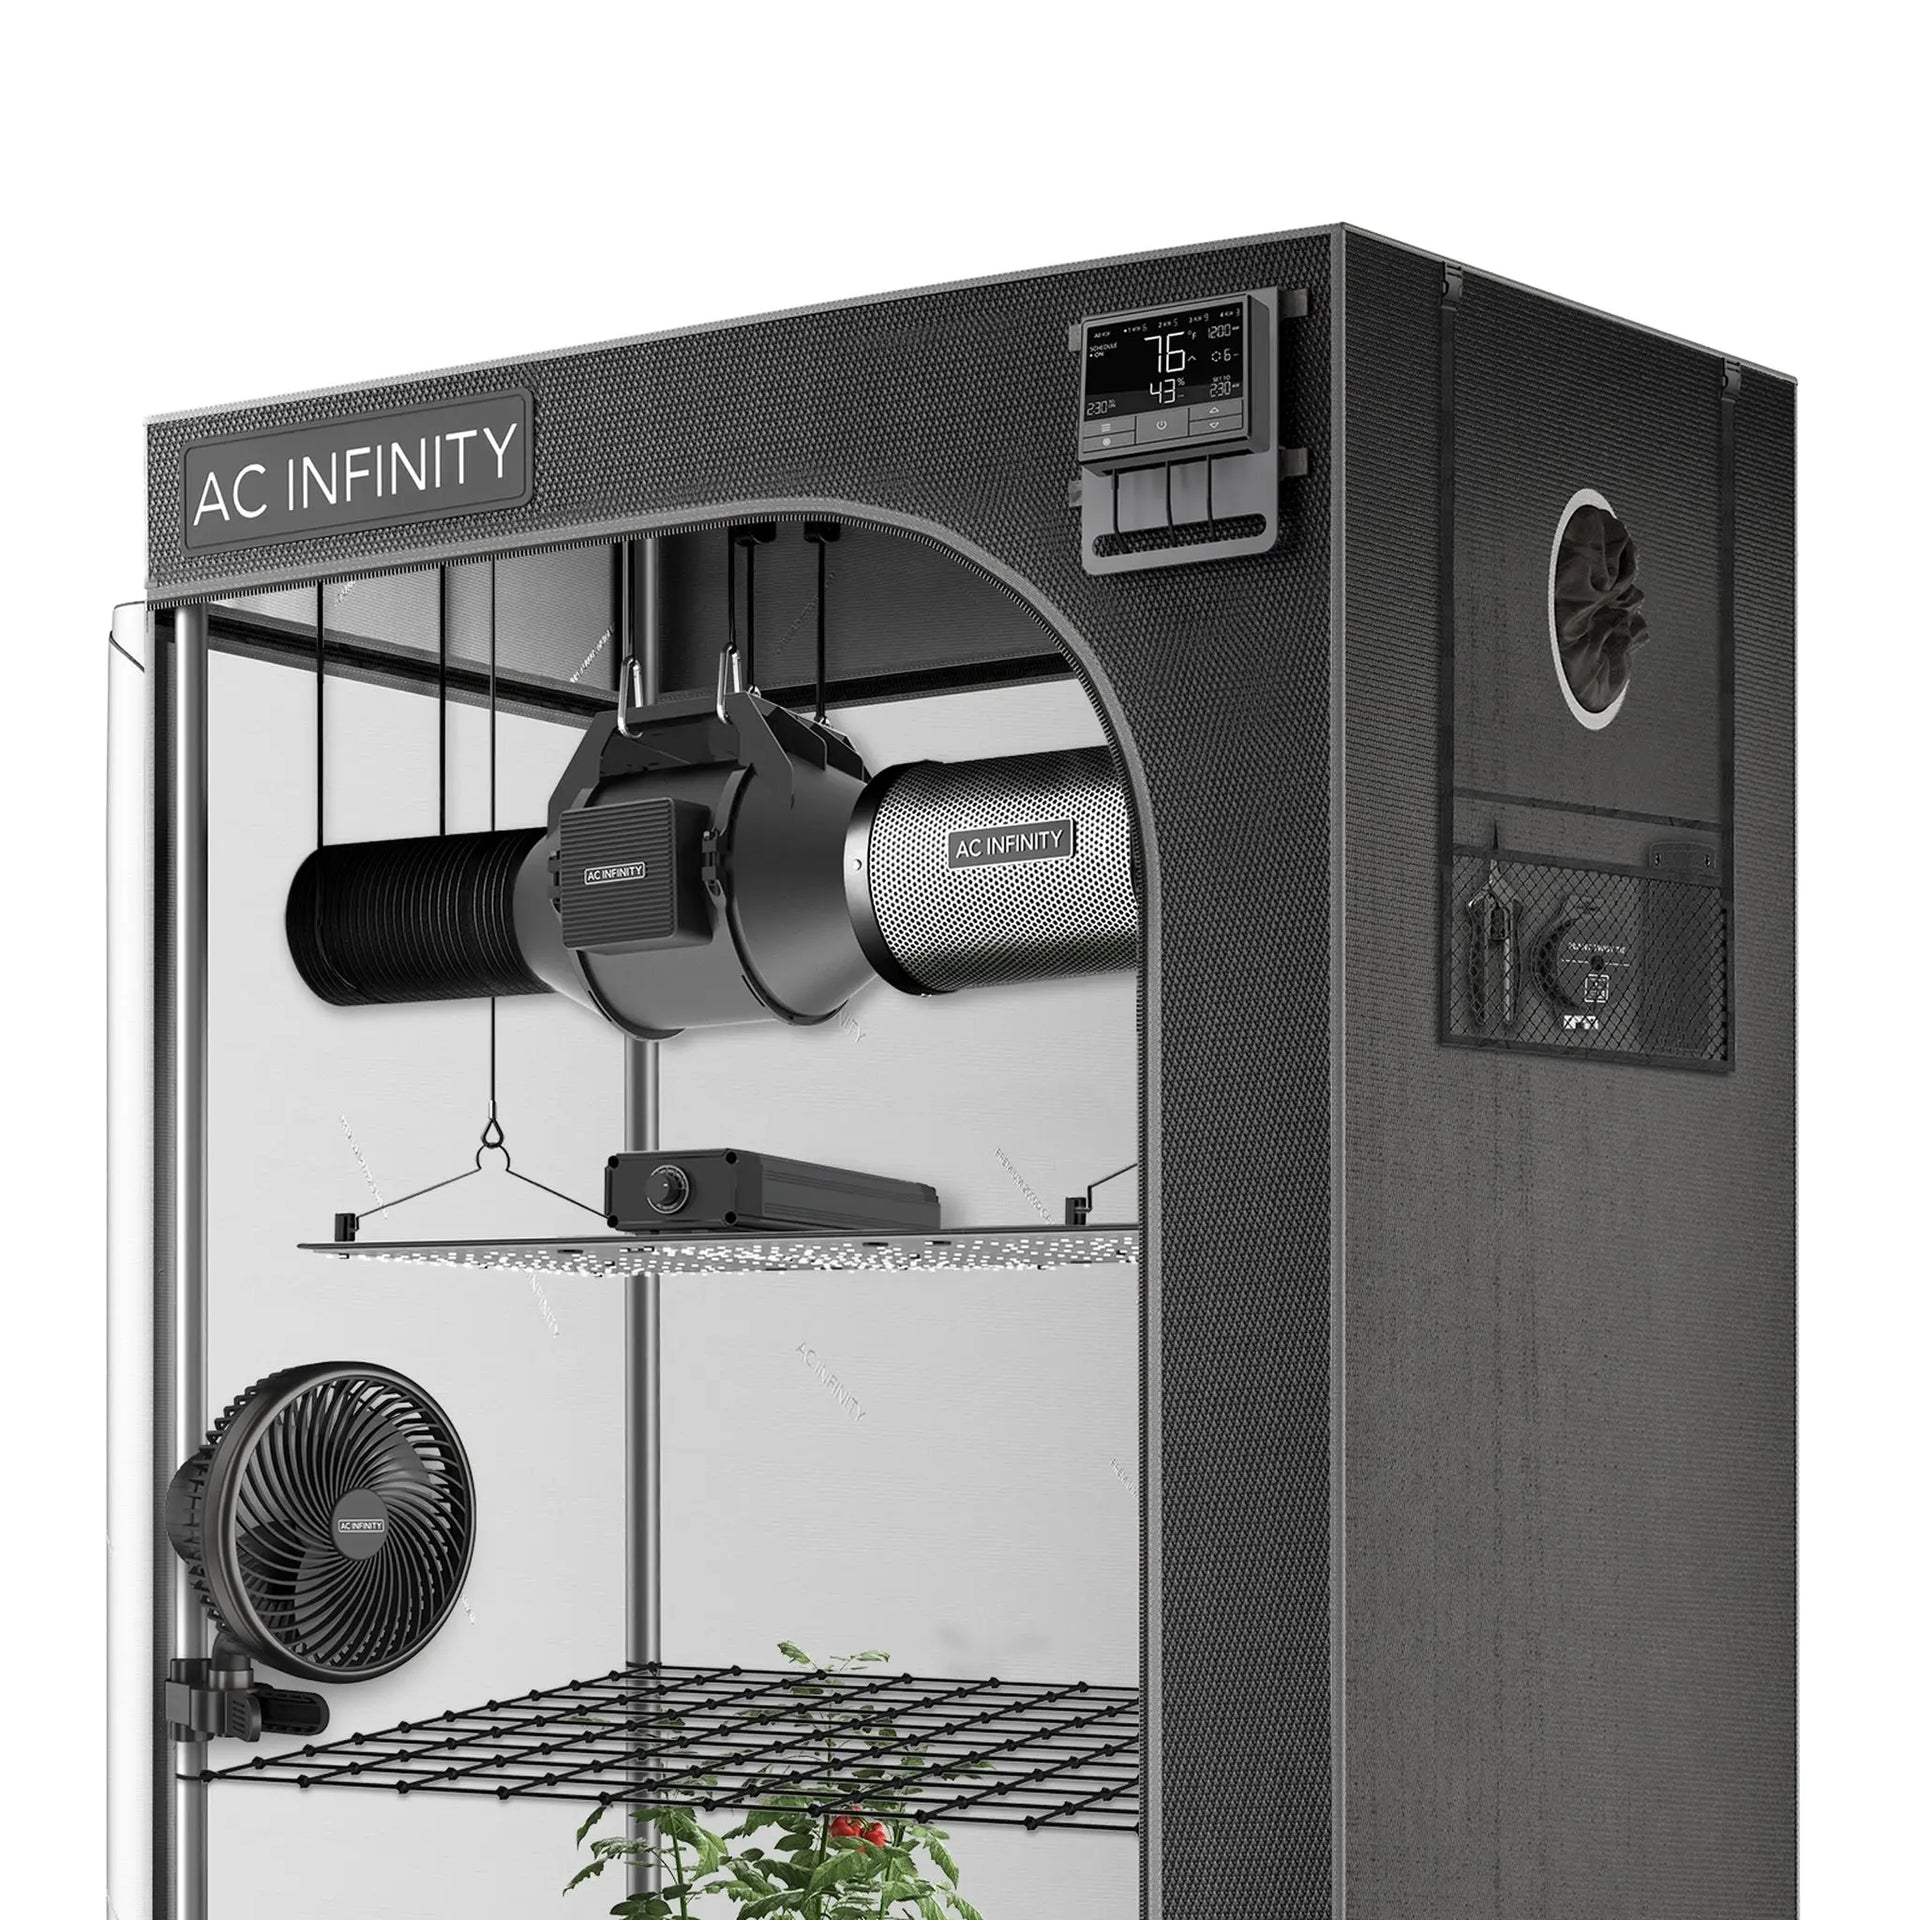 https://www.gardensupplyguys.com/cdn/shop/products/AC-Infinity-Advance-Grow-Tent-System-2x4_-2-Plant-Kit_-Integrated-Smart-Controls-To-Automate-Ventilation_-Circulation_-Full-Spectrum-Led-Grow-Light-AC-Infinity-1669515136.webp?v=1669515137&width=1920